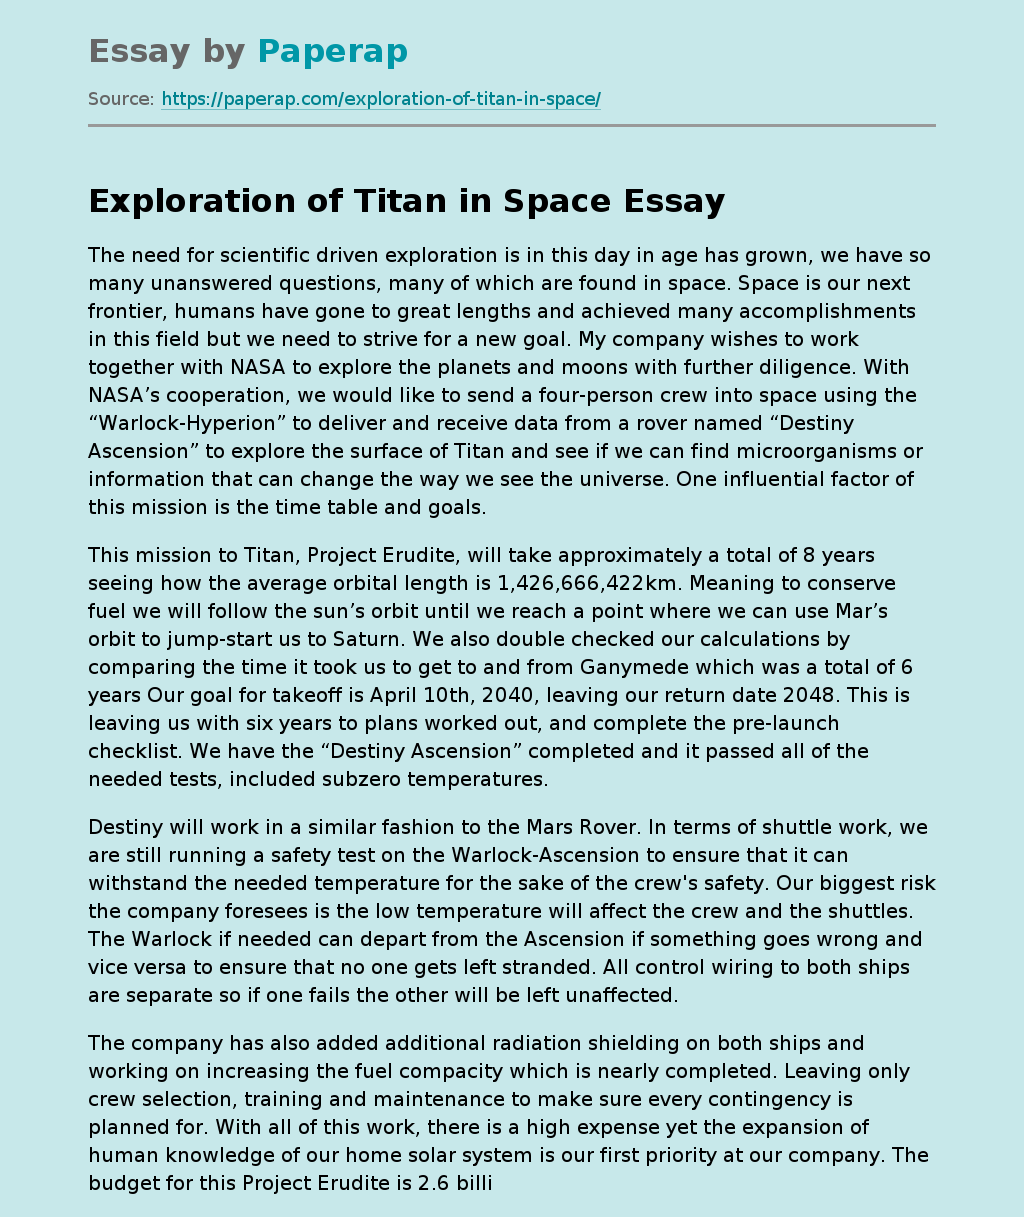 Exploration of Titan in Space